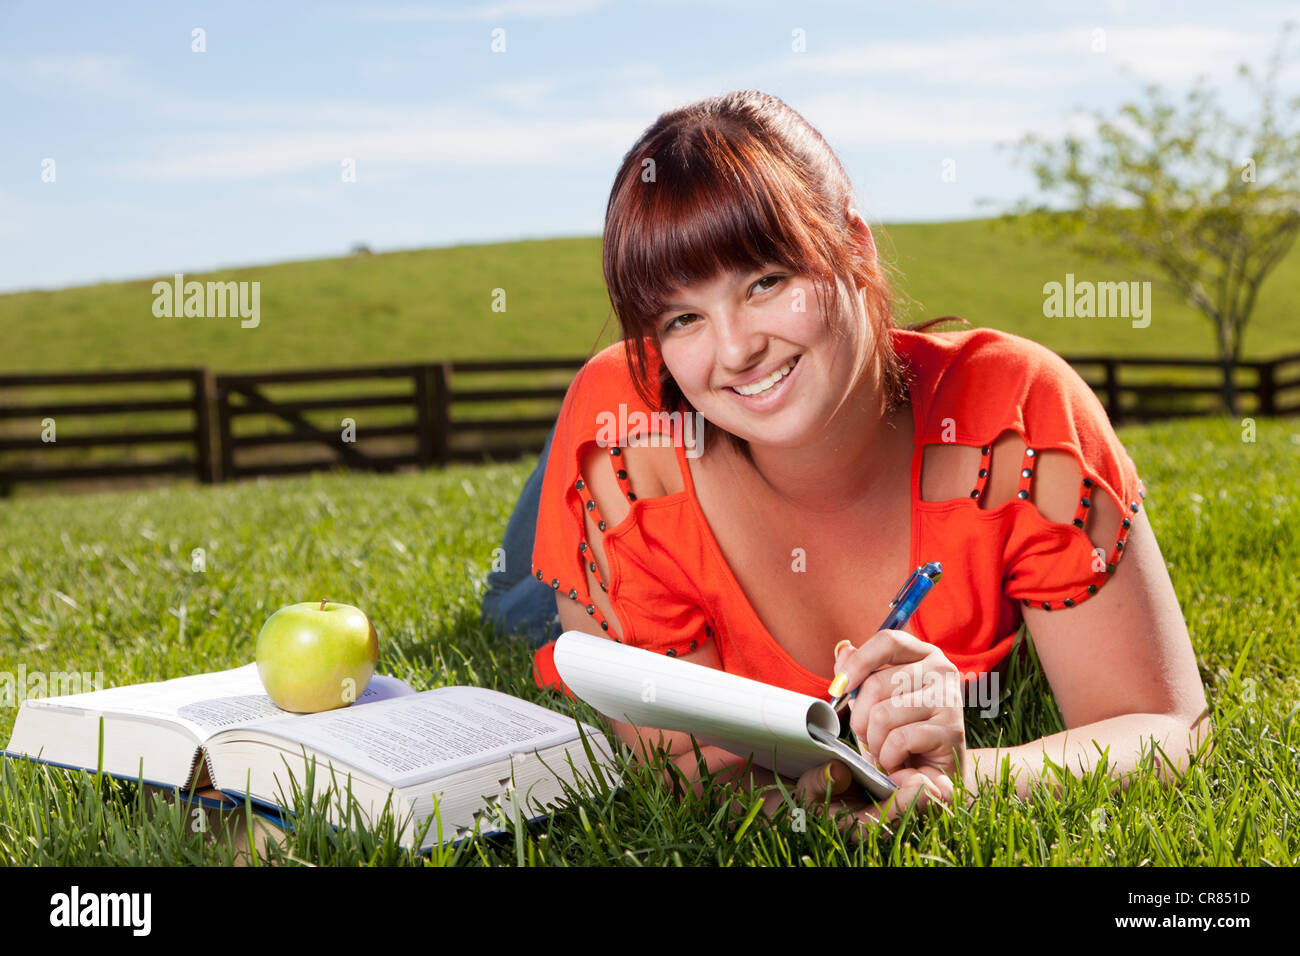 Studying outdoors Stock Photo